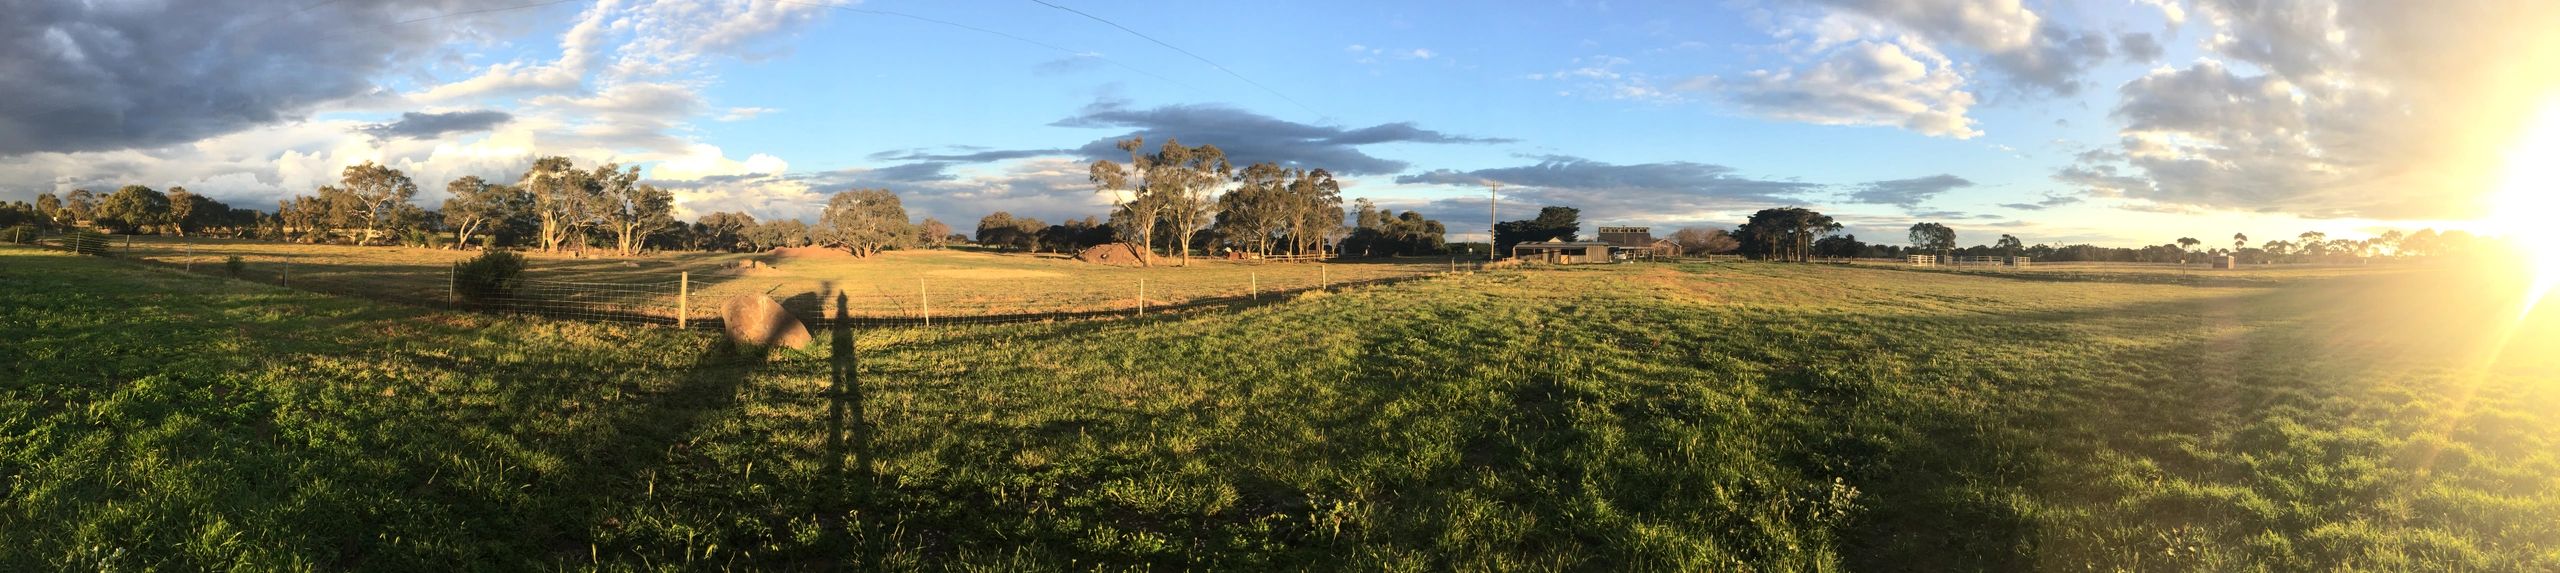 Little River, Victoria. The Horse's Heartbeat. Corporate team building. Equine therapies.